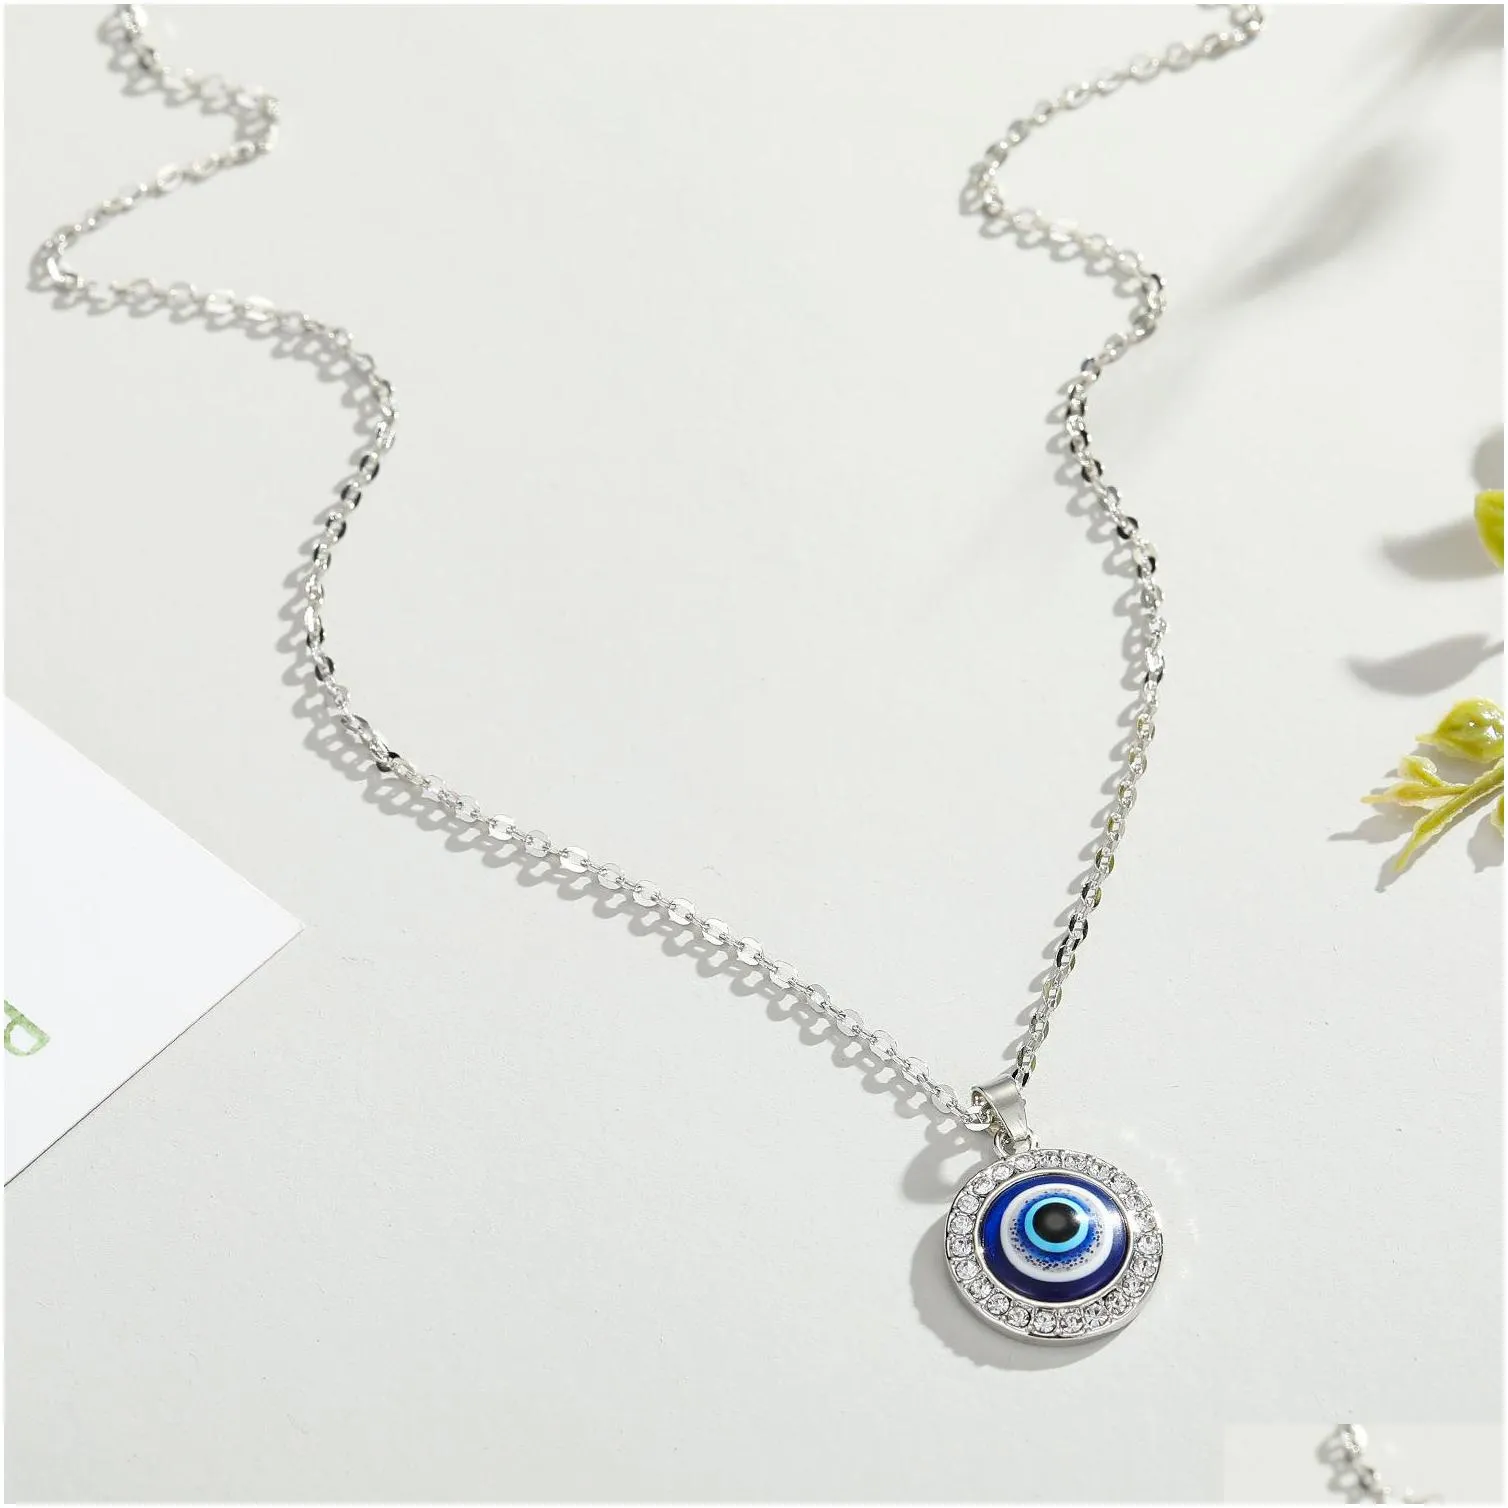 ups jewelry turkish eye necklace dot party favor diamond round blue eye pendant necklace foreign trade sweater chain jewelry